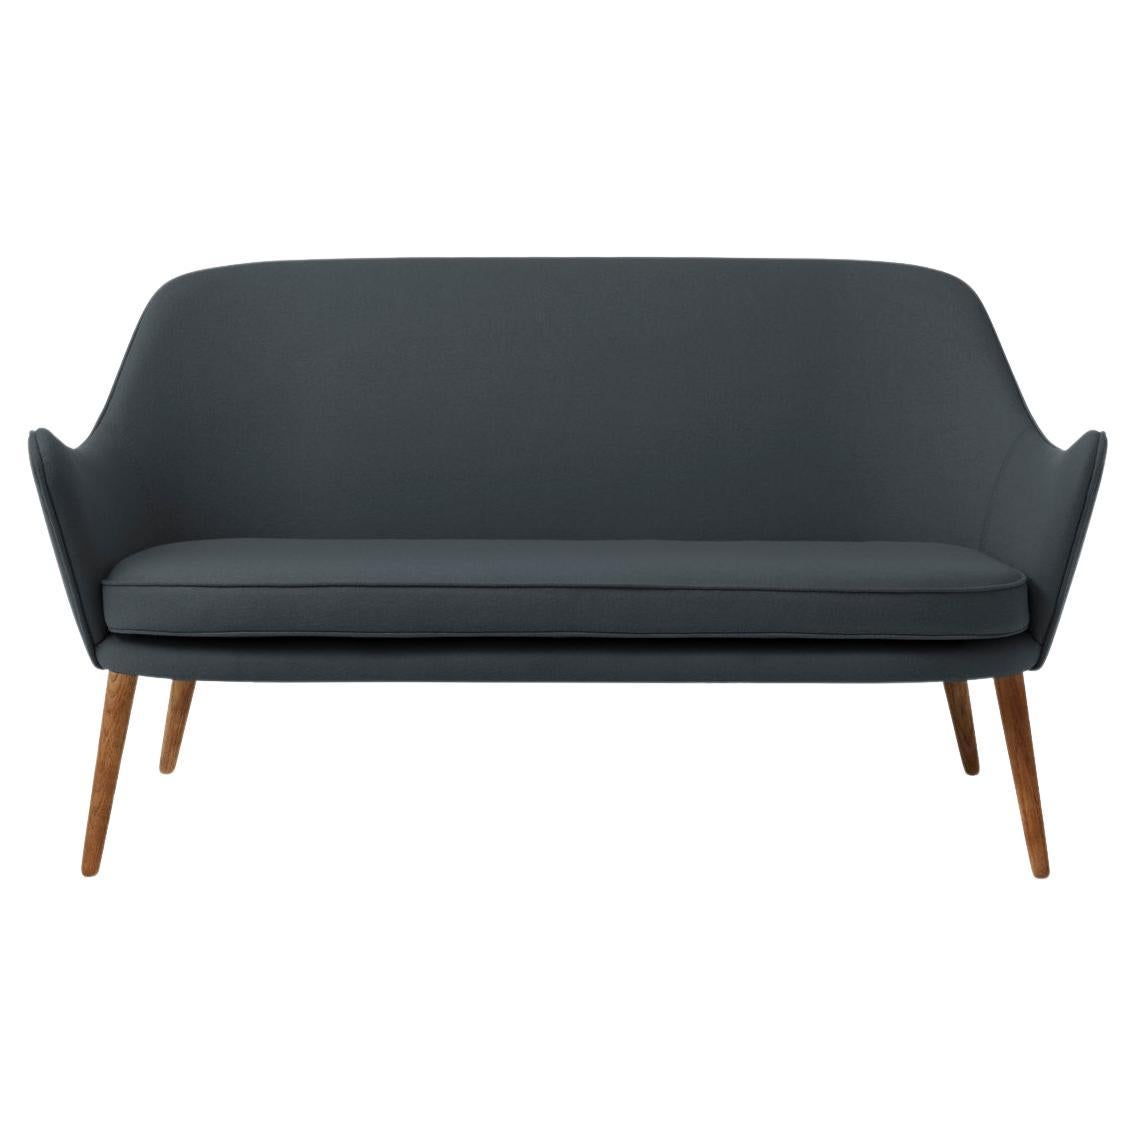 Dwell 2 Seater Petrol by Warm Nordic For Sale